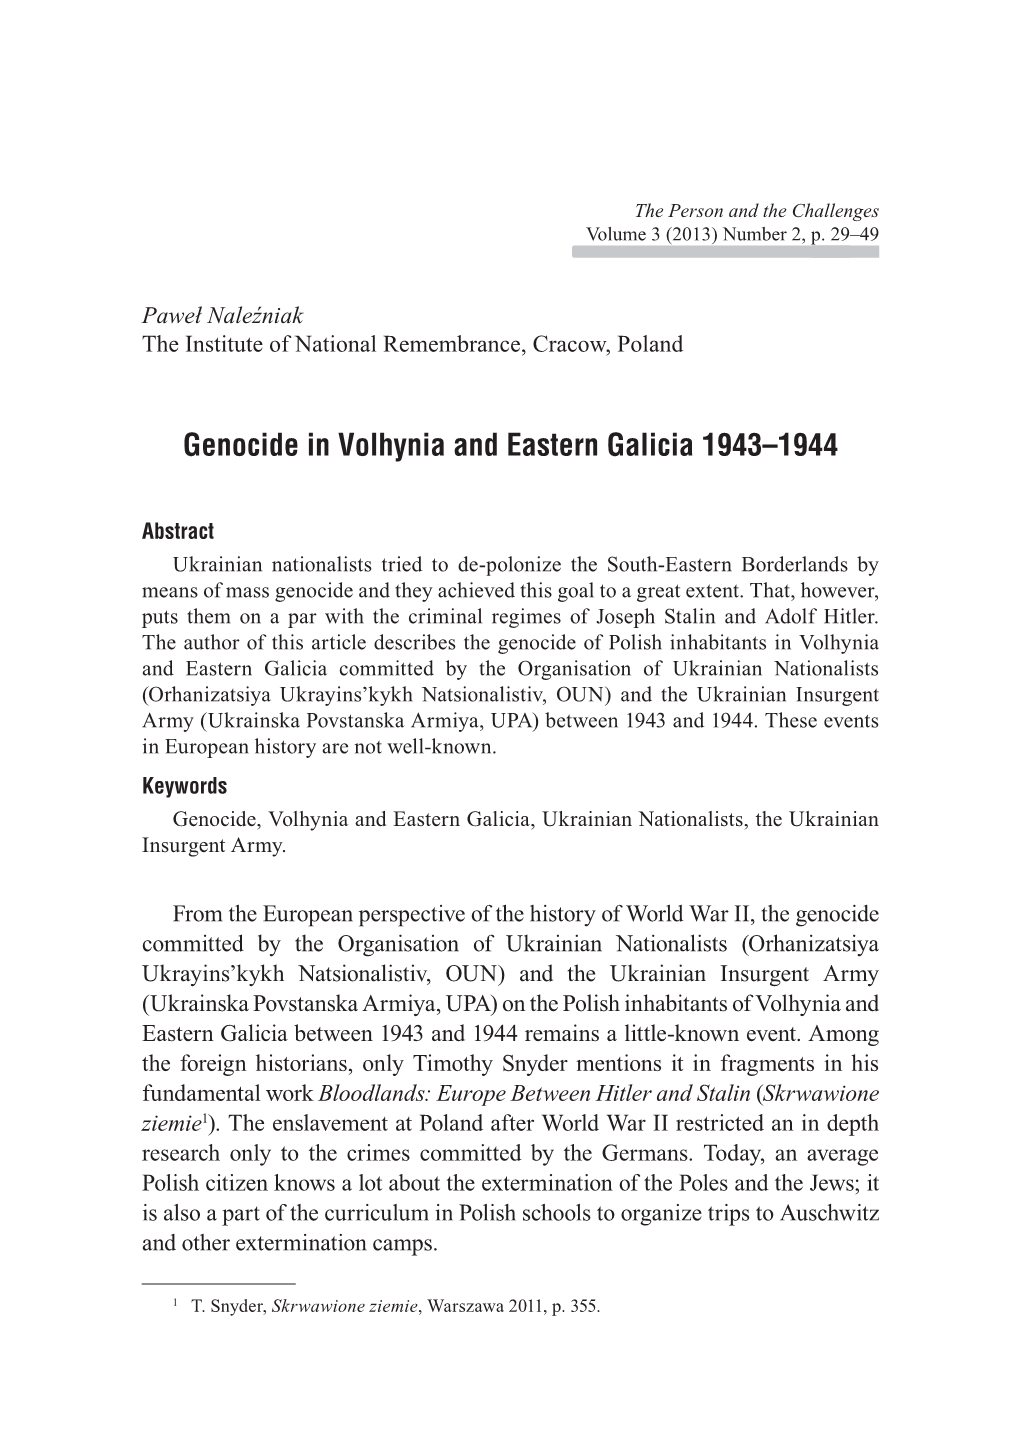 Genocide in Volhynia and Eastern Galicia 1943–1944